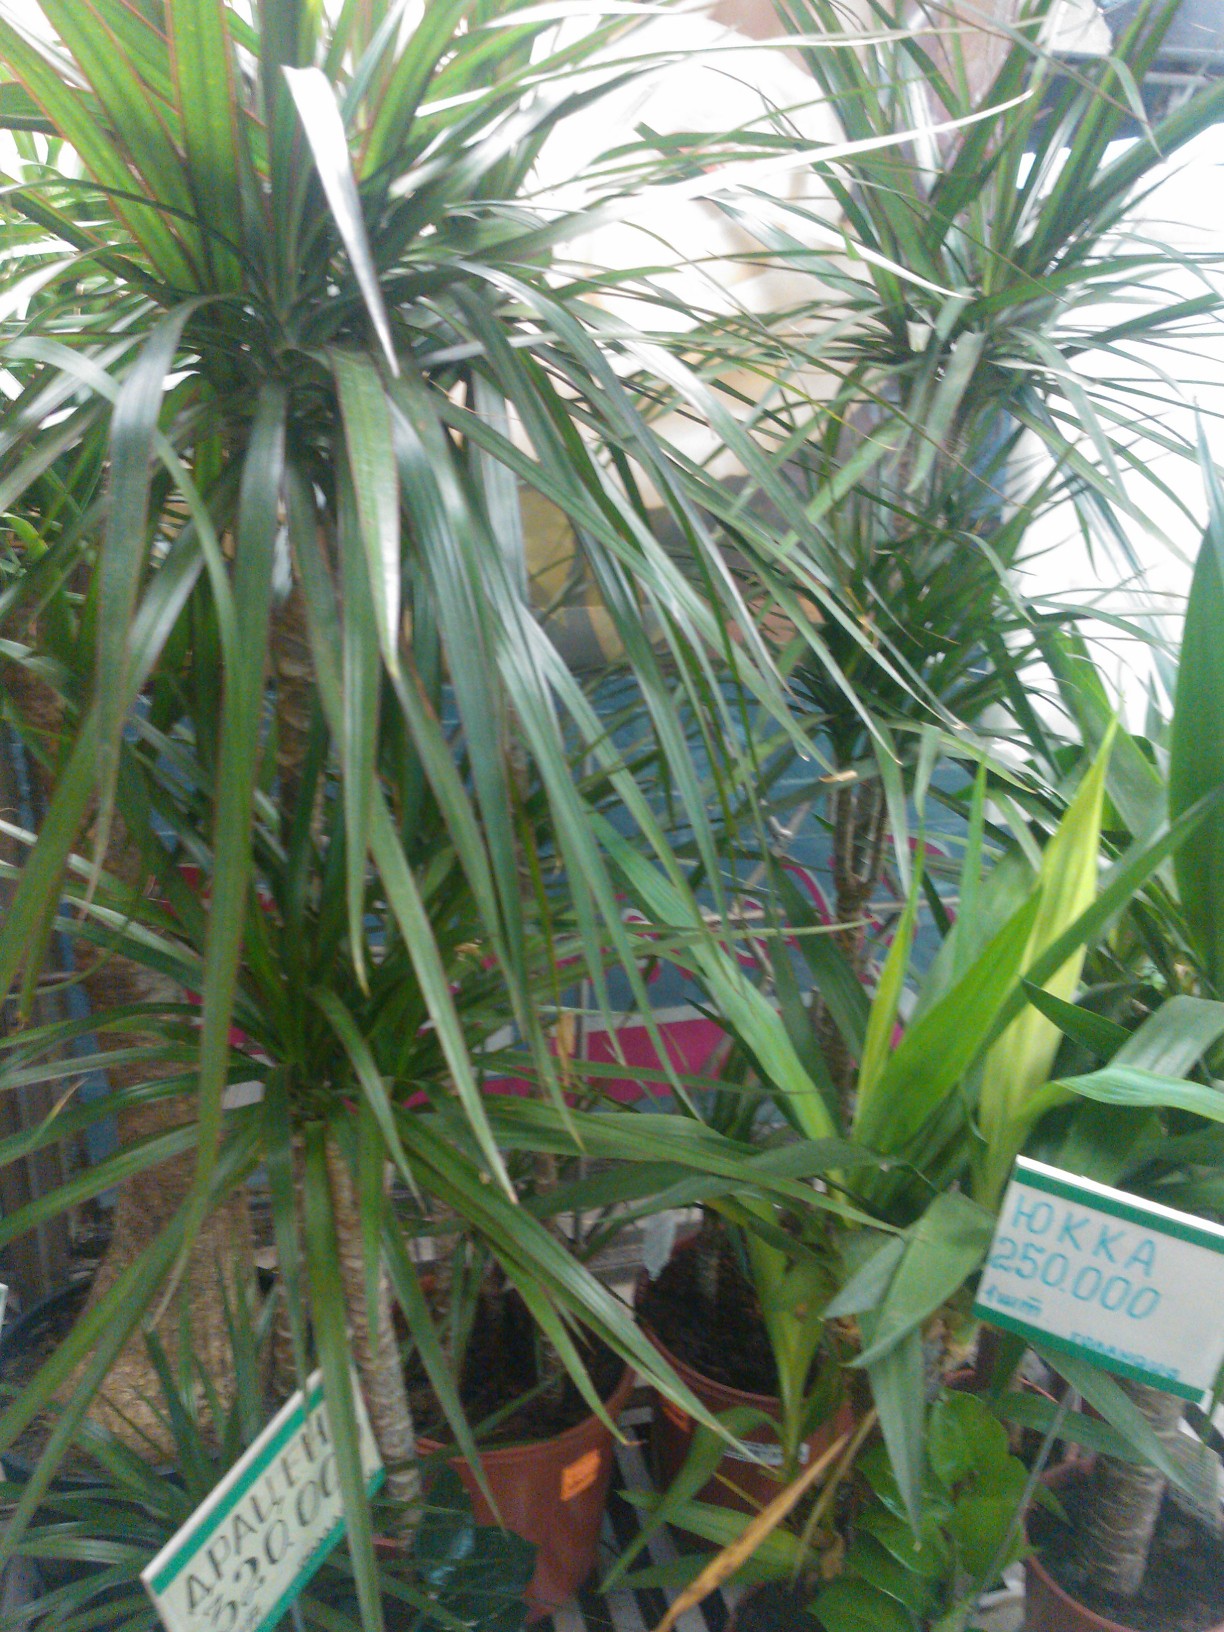 Dracaena Plant Care growing, planting, cutting. Diseases